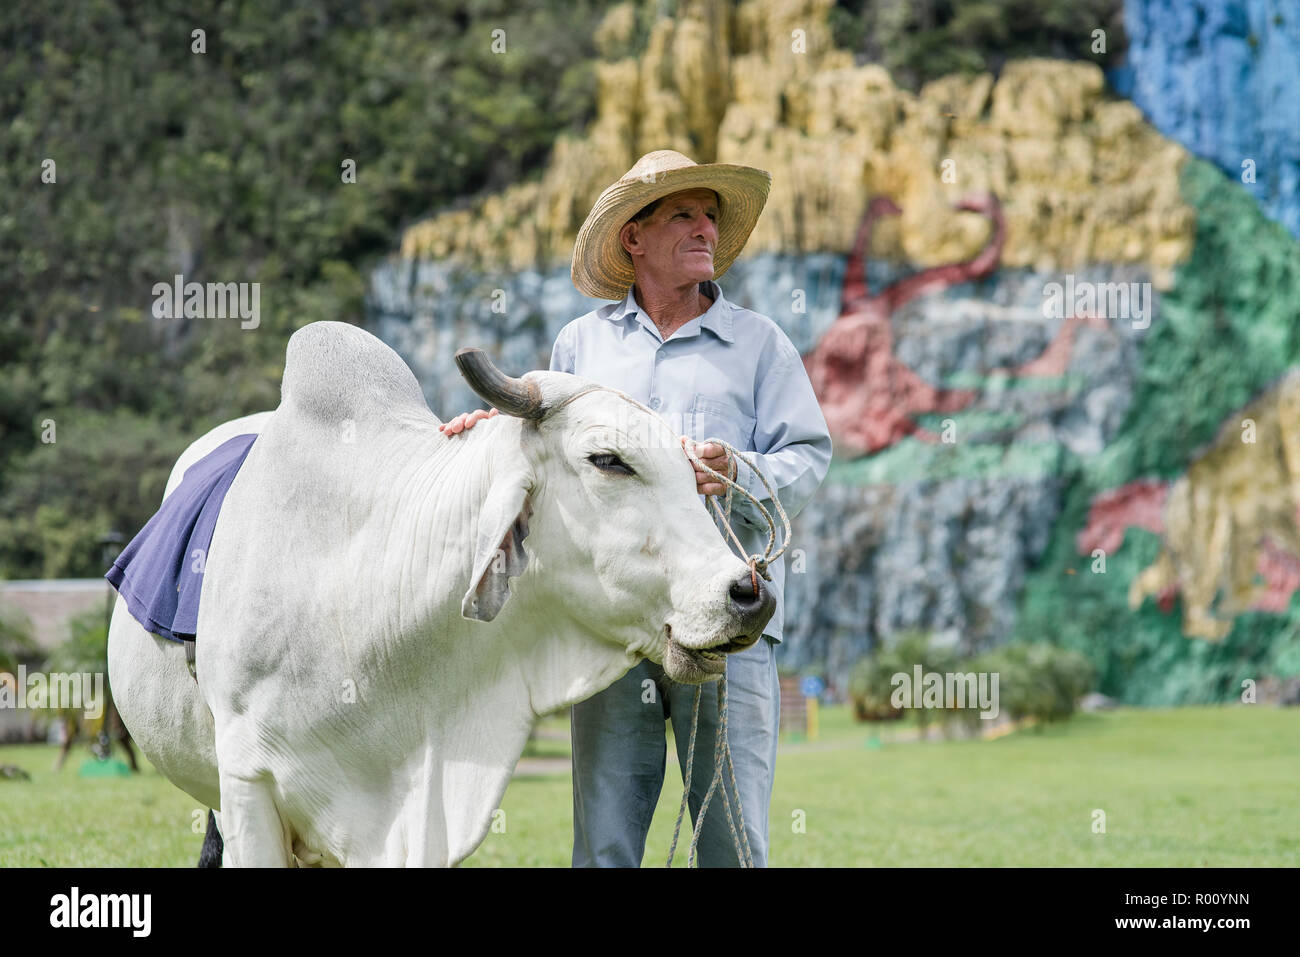 A farmer and his lifestock post for a photo in front of the Mural of Prehisory. Stock Photo